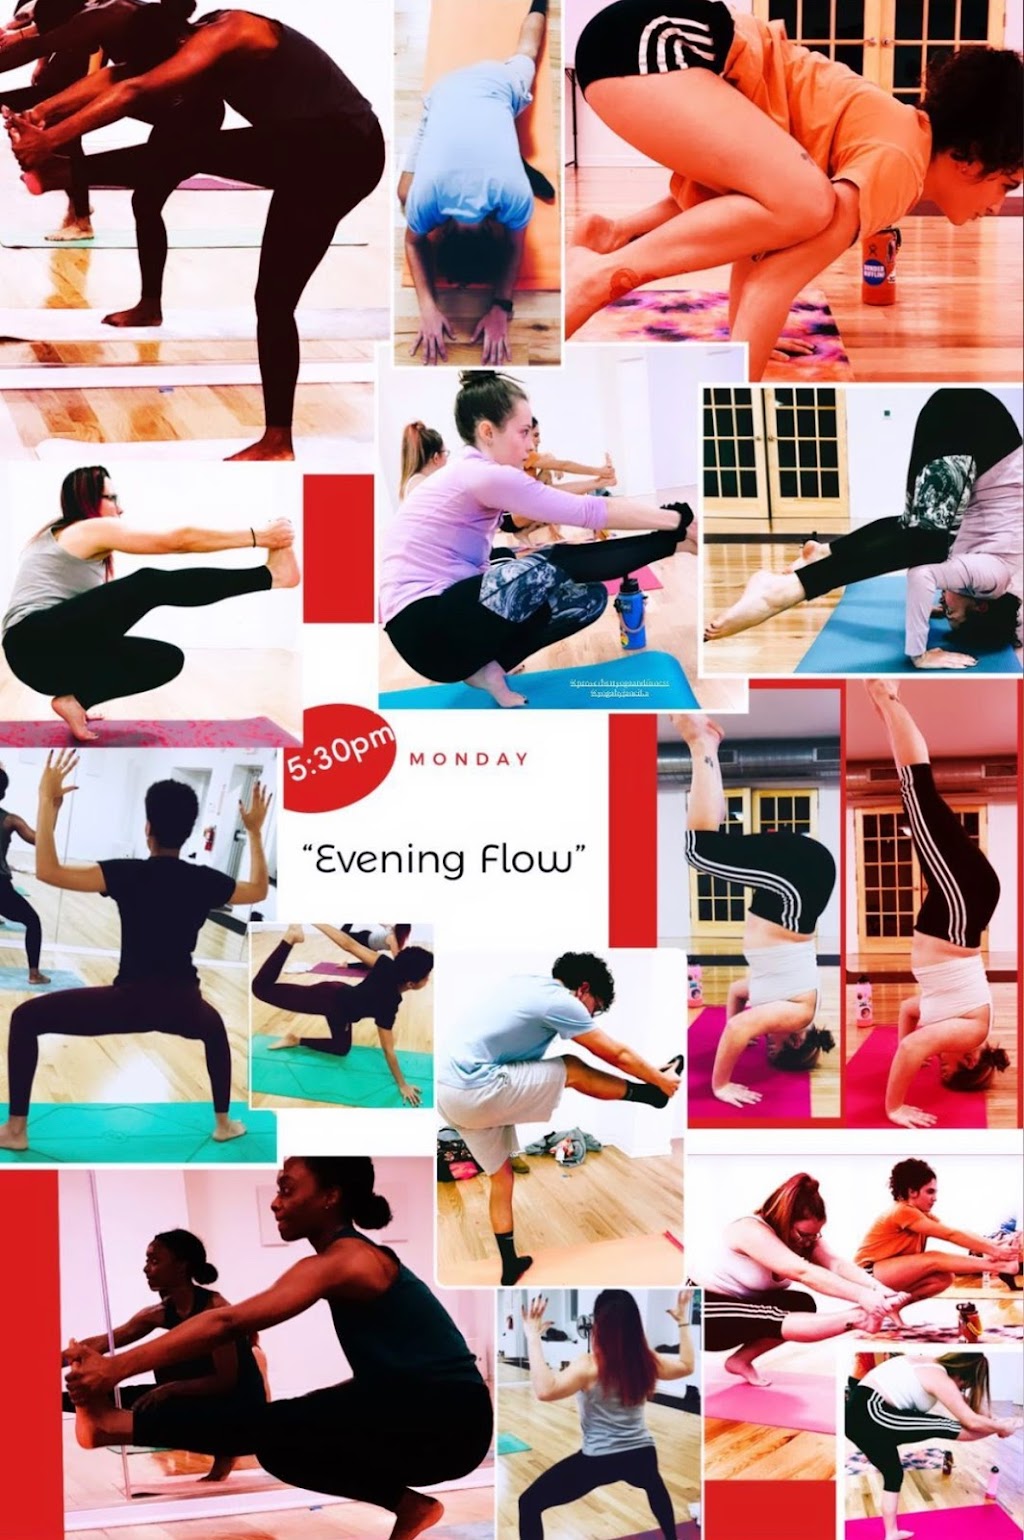 Proverbs 31 Yoga and Fitness | 1554 S Delsea Dr, Vineland, NJ 08360 | Phone: (856) 447-2240